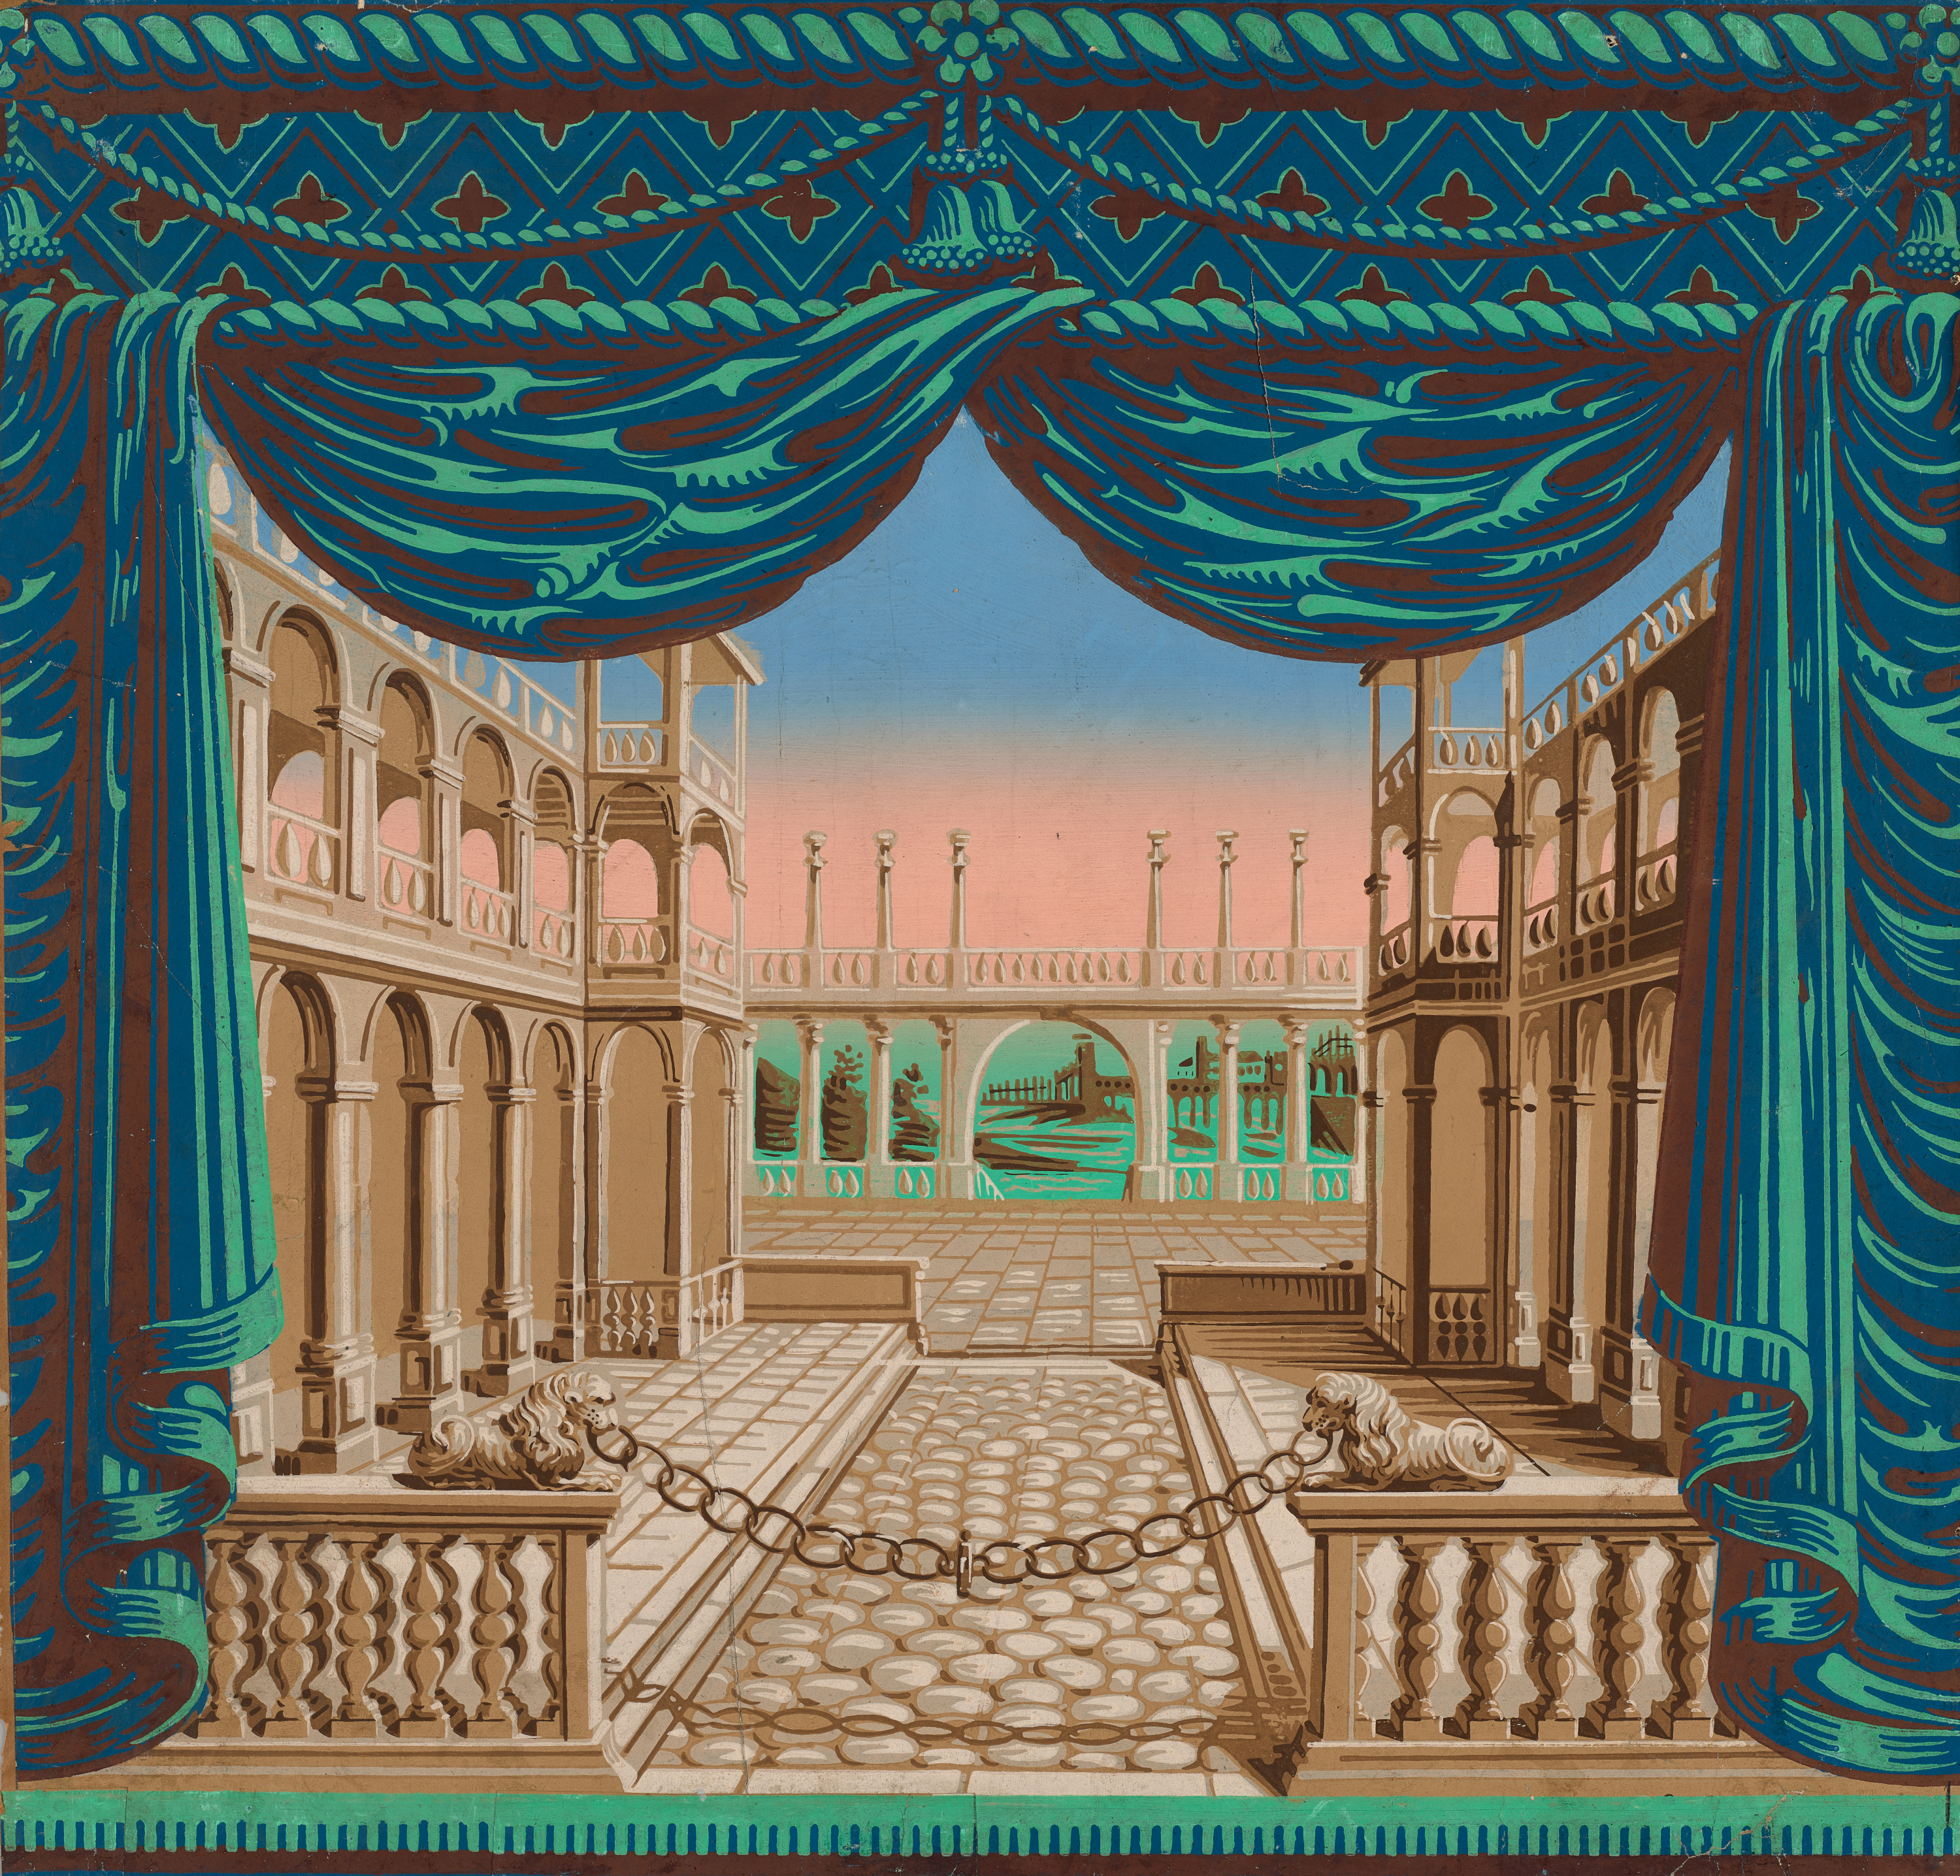 A wallpaper panel depicting a palatial courtyard framed by ornate blue and green drapery with stone archways, columns, and two lion statues flanking a cobblestone path.